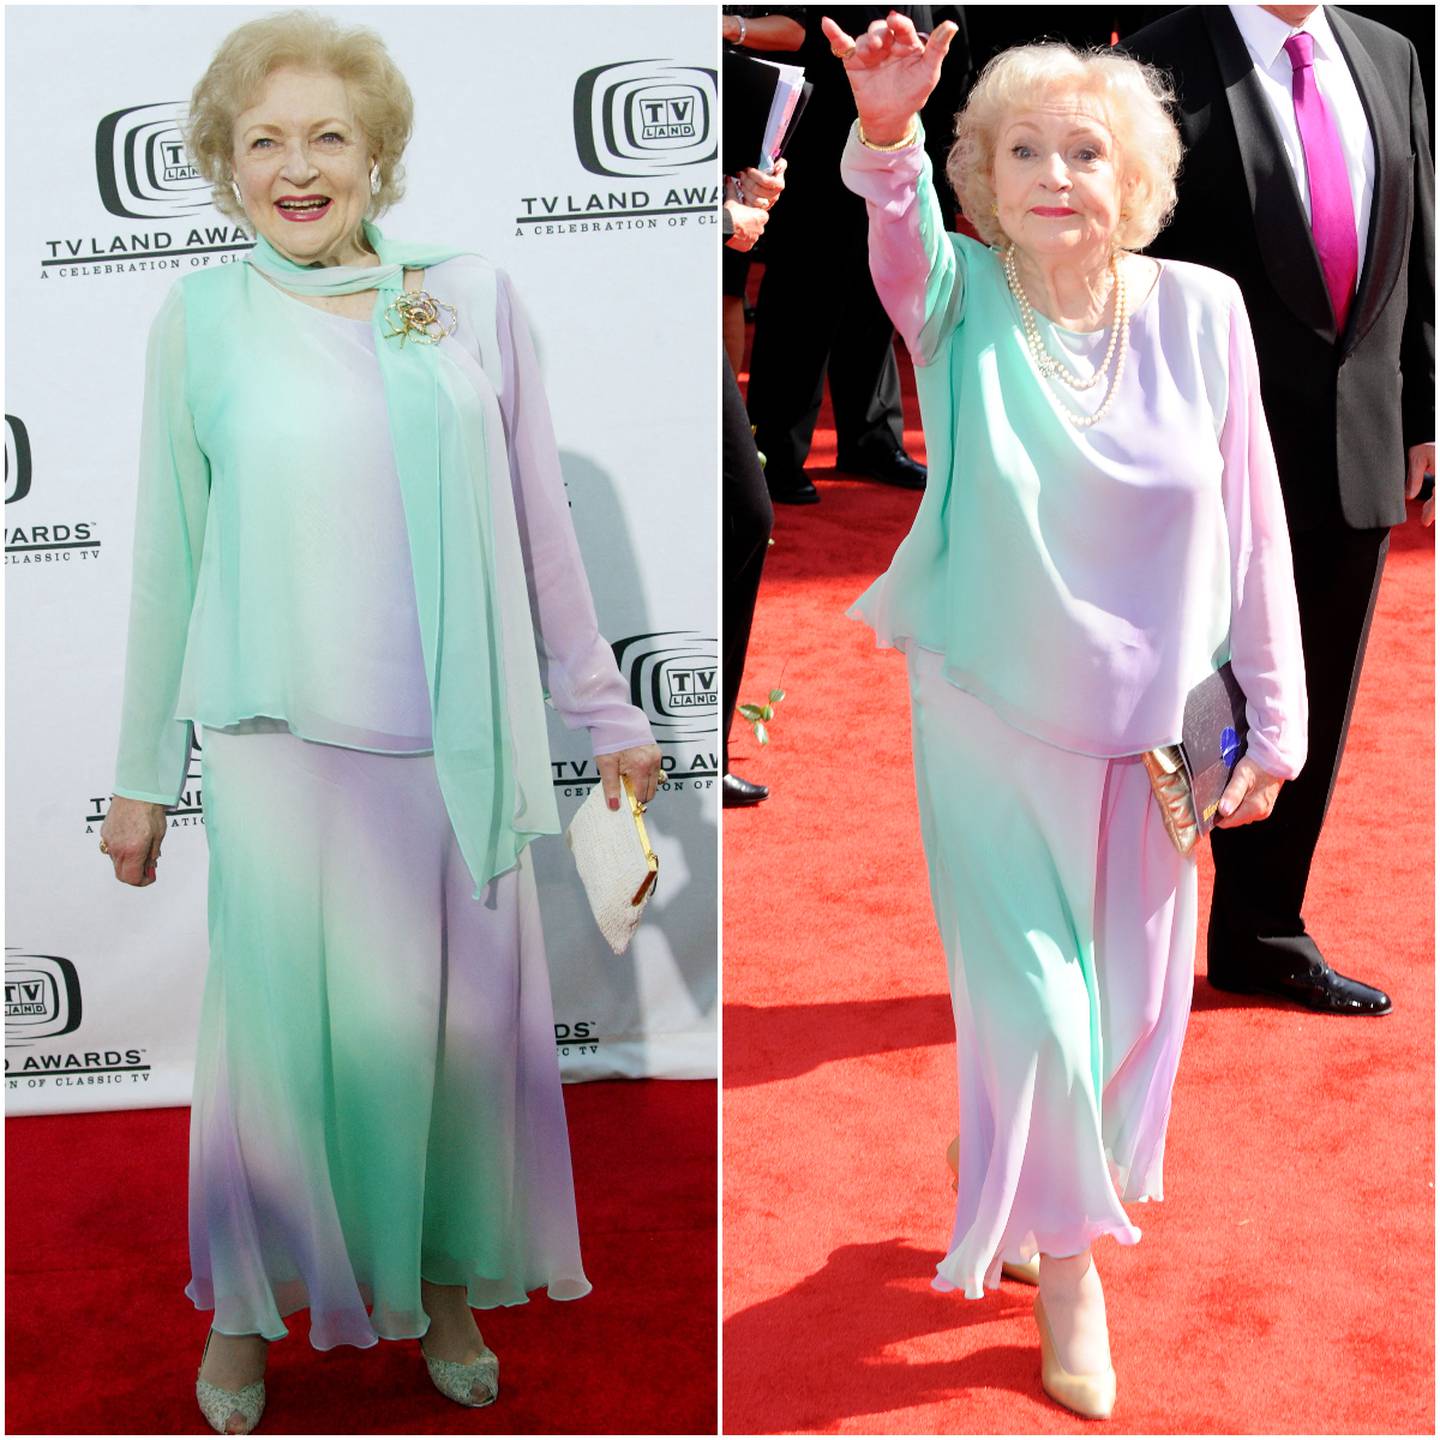 Betty White wasn't afraid to repeat red carpet looks, seen here in 2004 and 2010. Getty Images